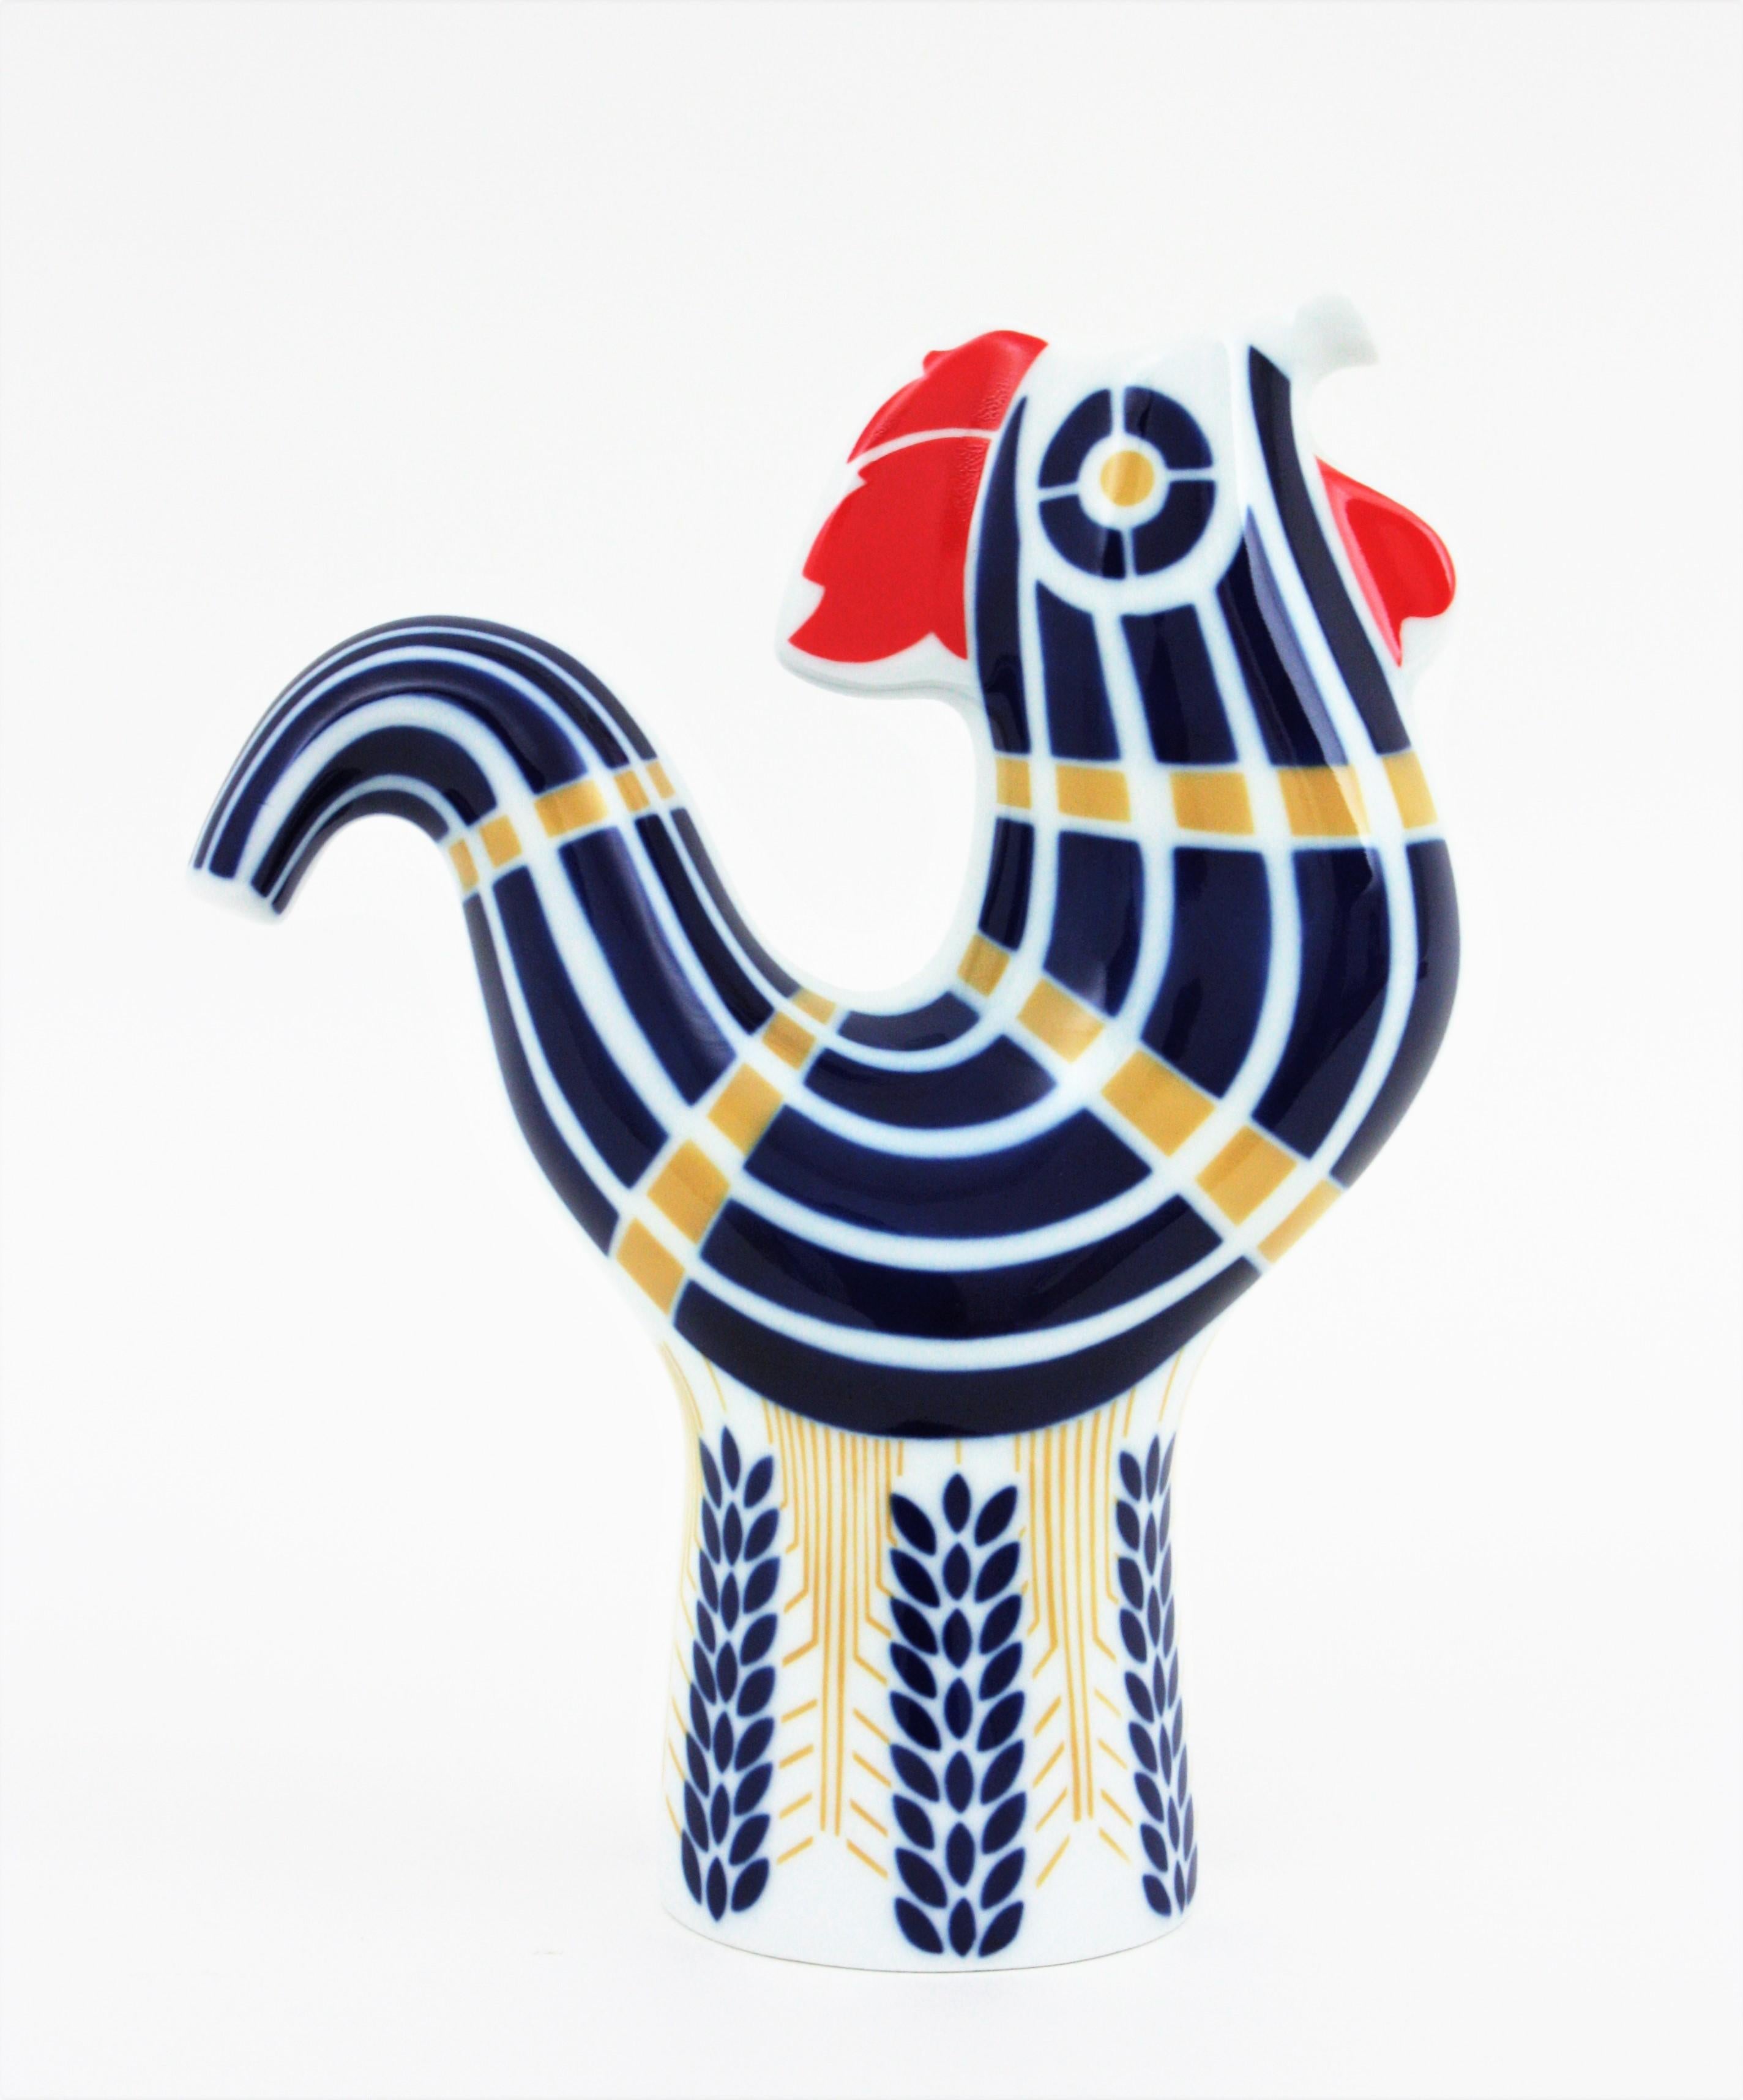 Porcelain rooster vase / pitcher, Sargadelos, Spain, 1950s-1960s.
Midcentury decorative rooster shaped jug vase in white and cobalt blue porcelain with golden and red accents.
Use it as decorative vase or as jug server / tableware.
A cool accent